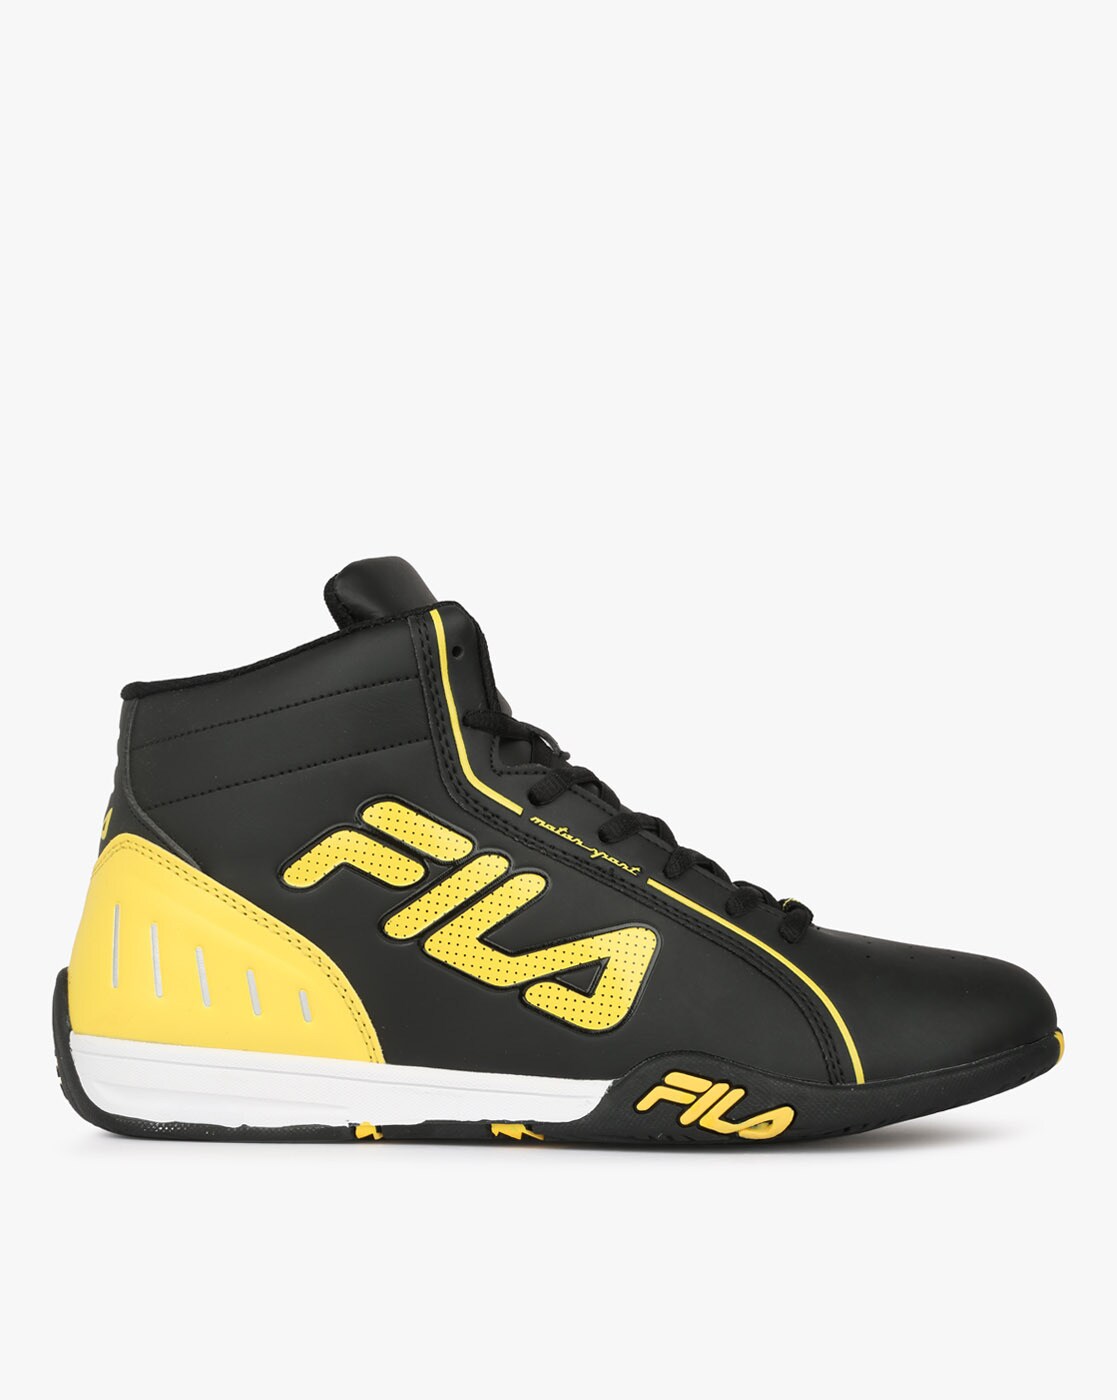 fila high tops yellow Online Sale, UP TO 66% OFF